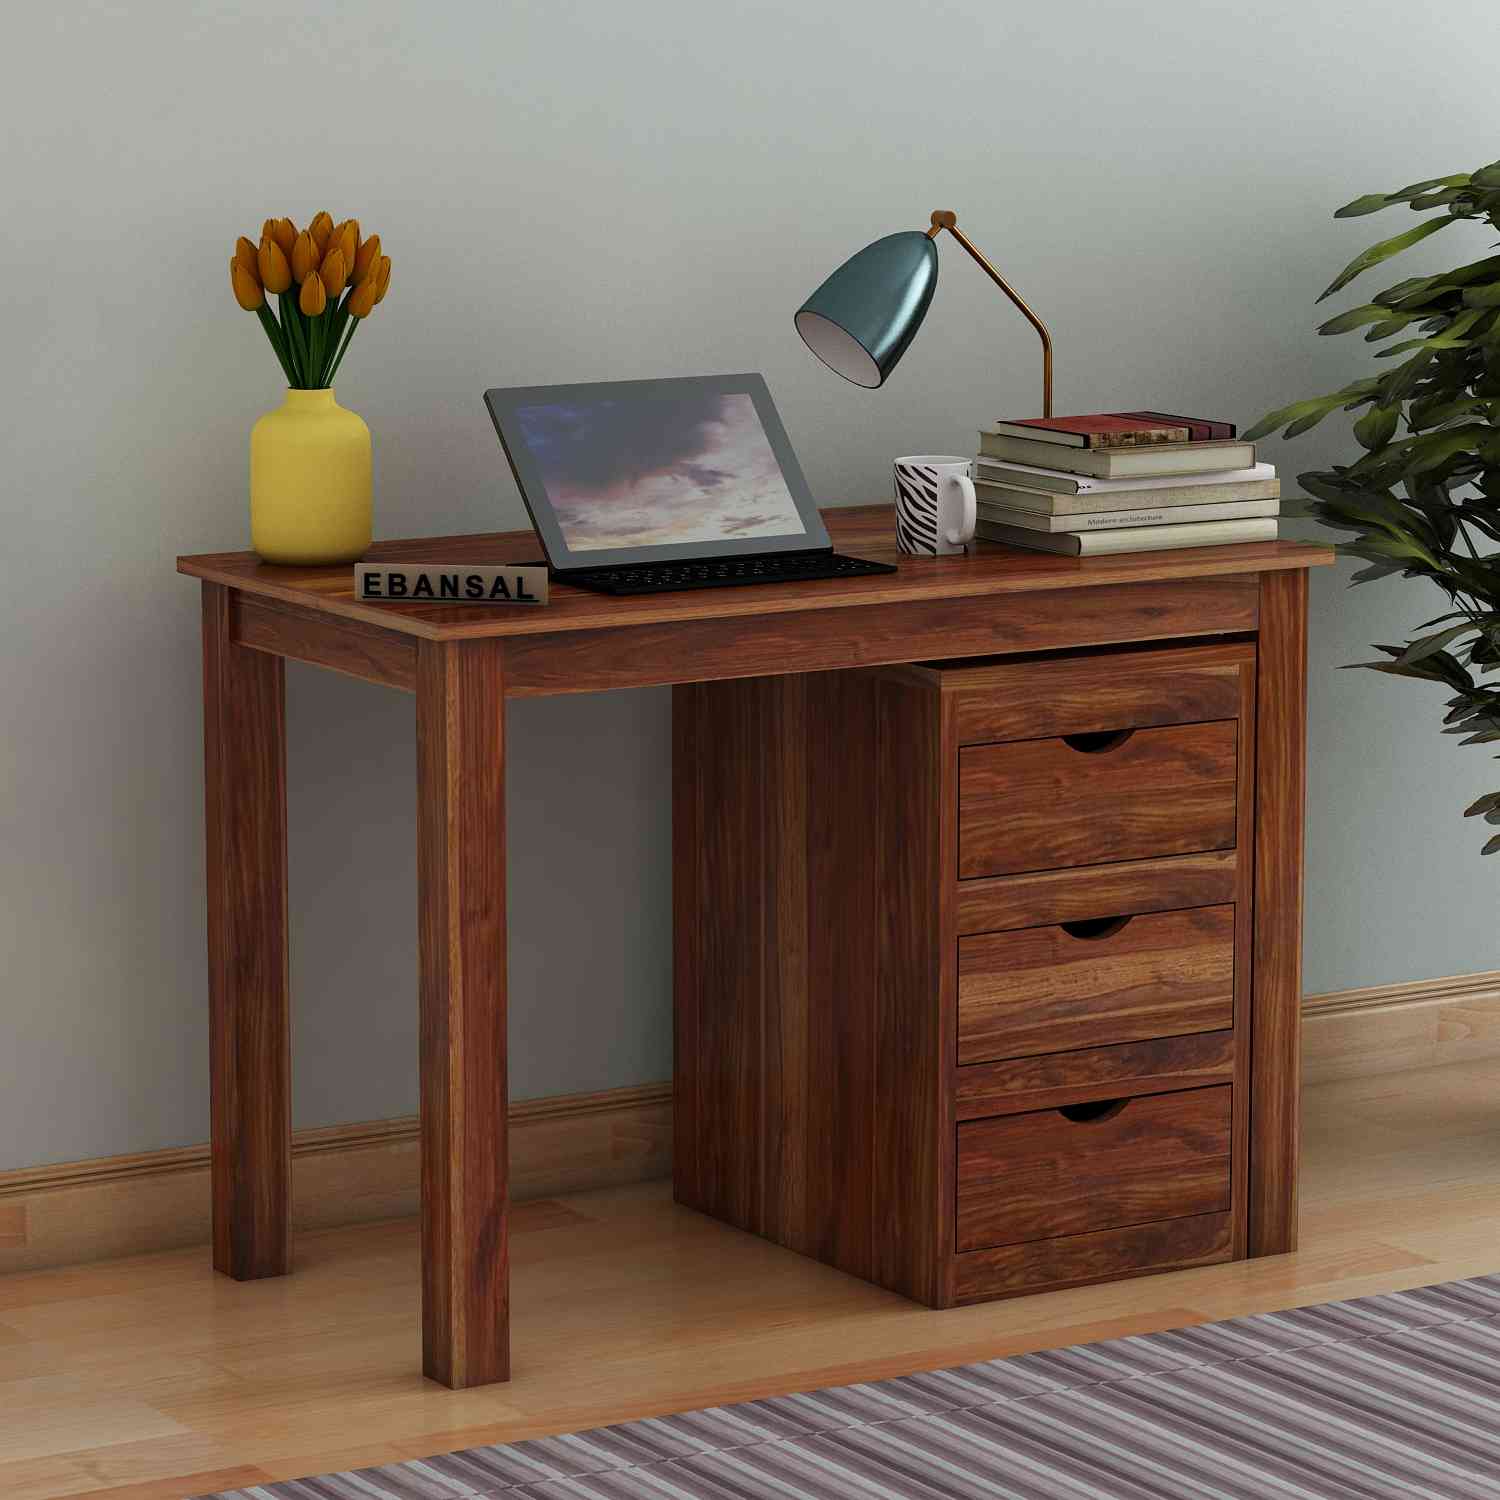 Fusta Solid Sheesham Wood Study Table With Storage (Natural Finish)